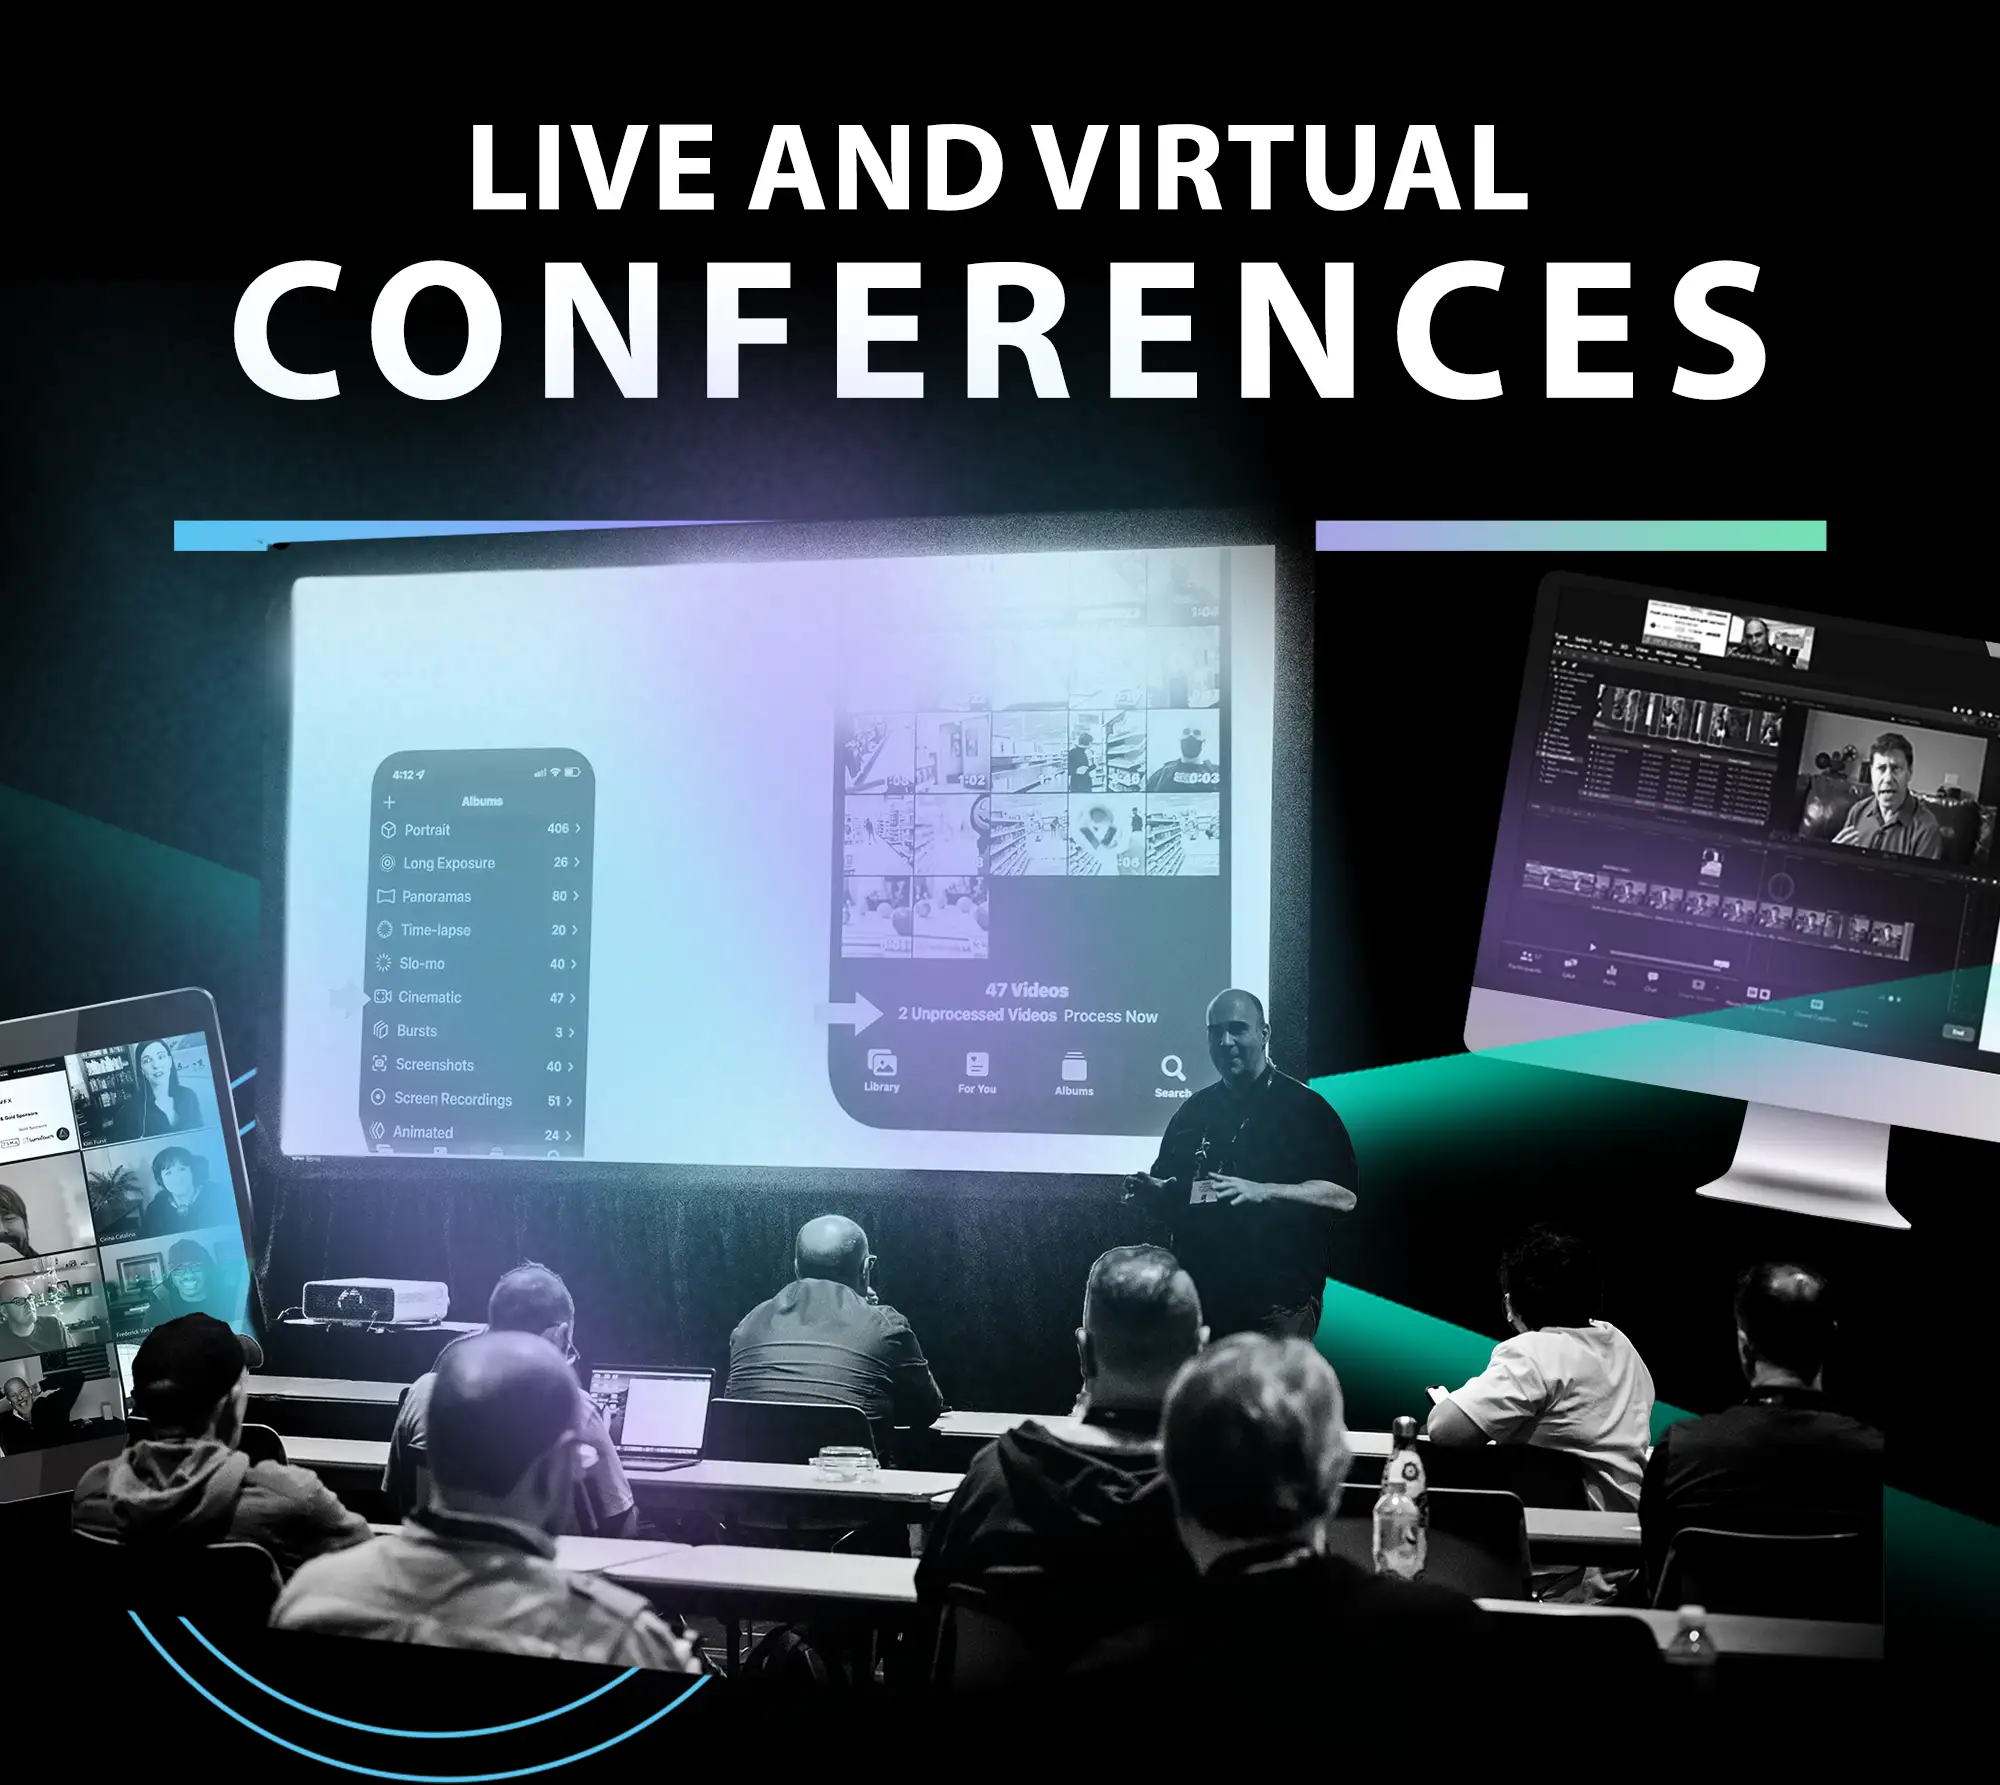 Live and Virtual Conferences - image collage